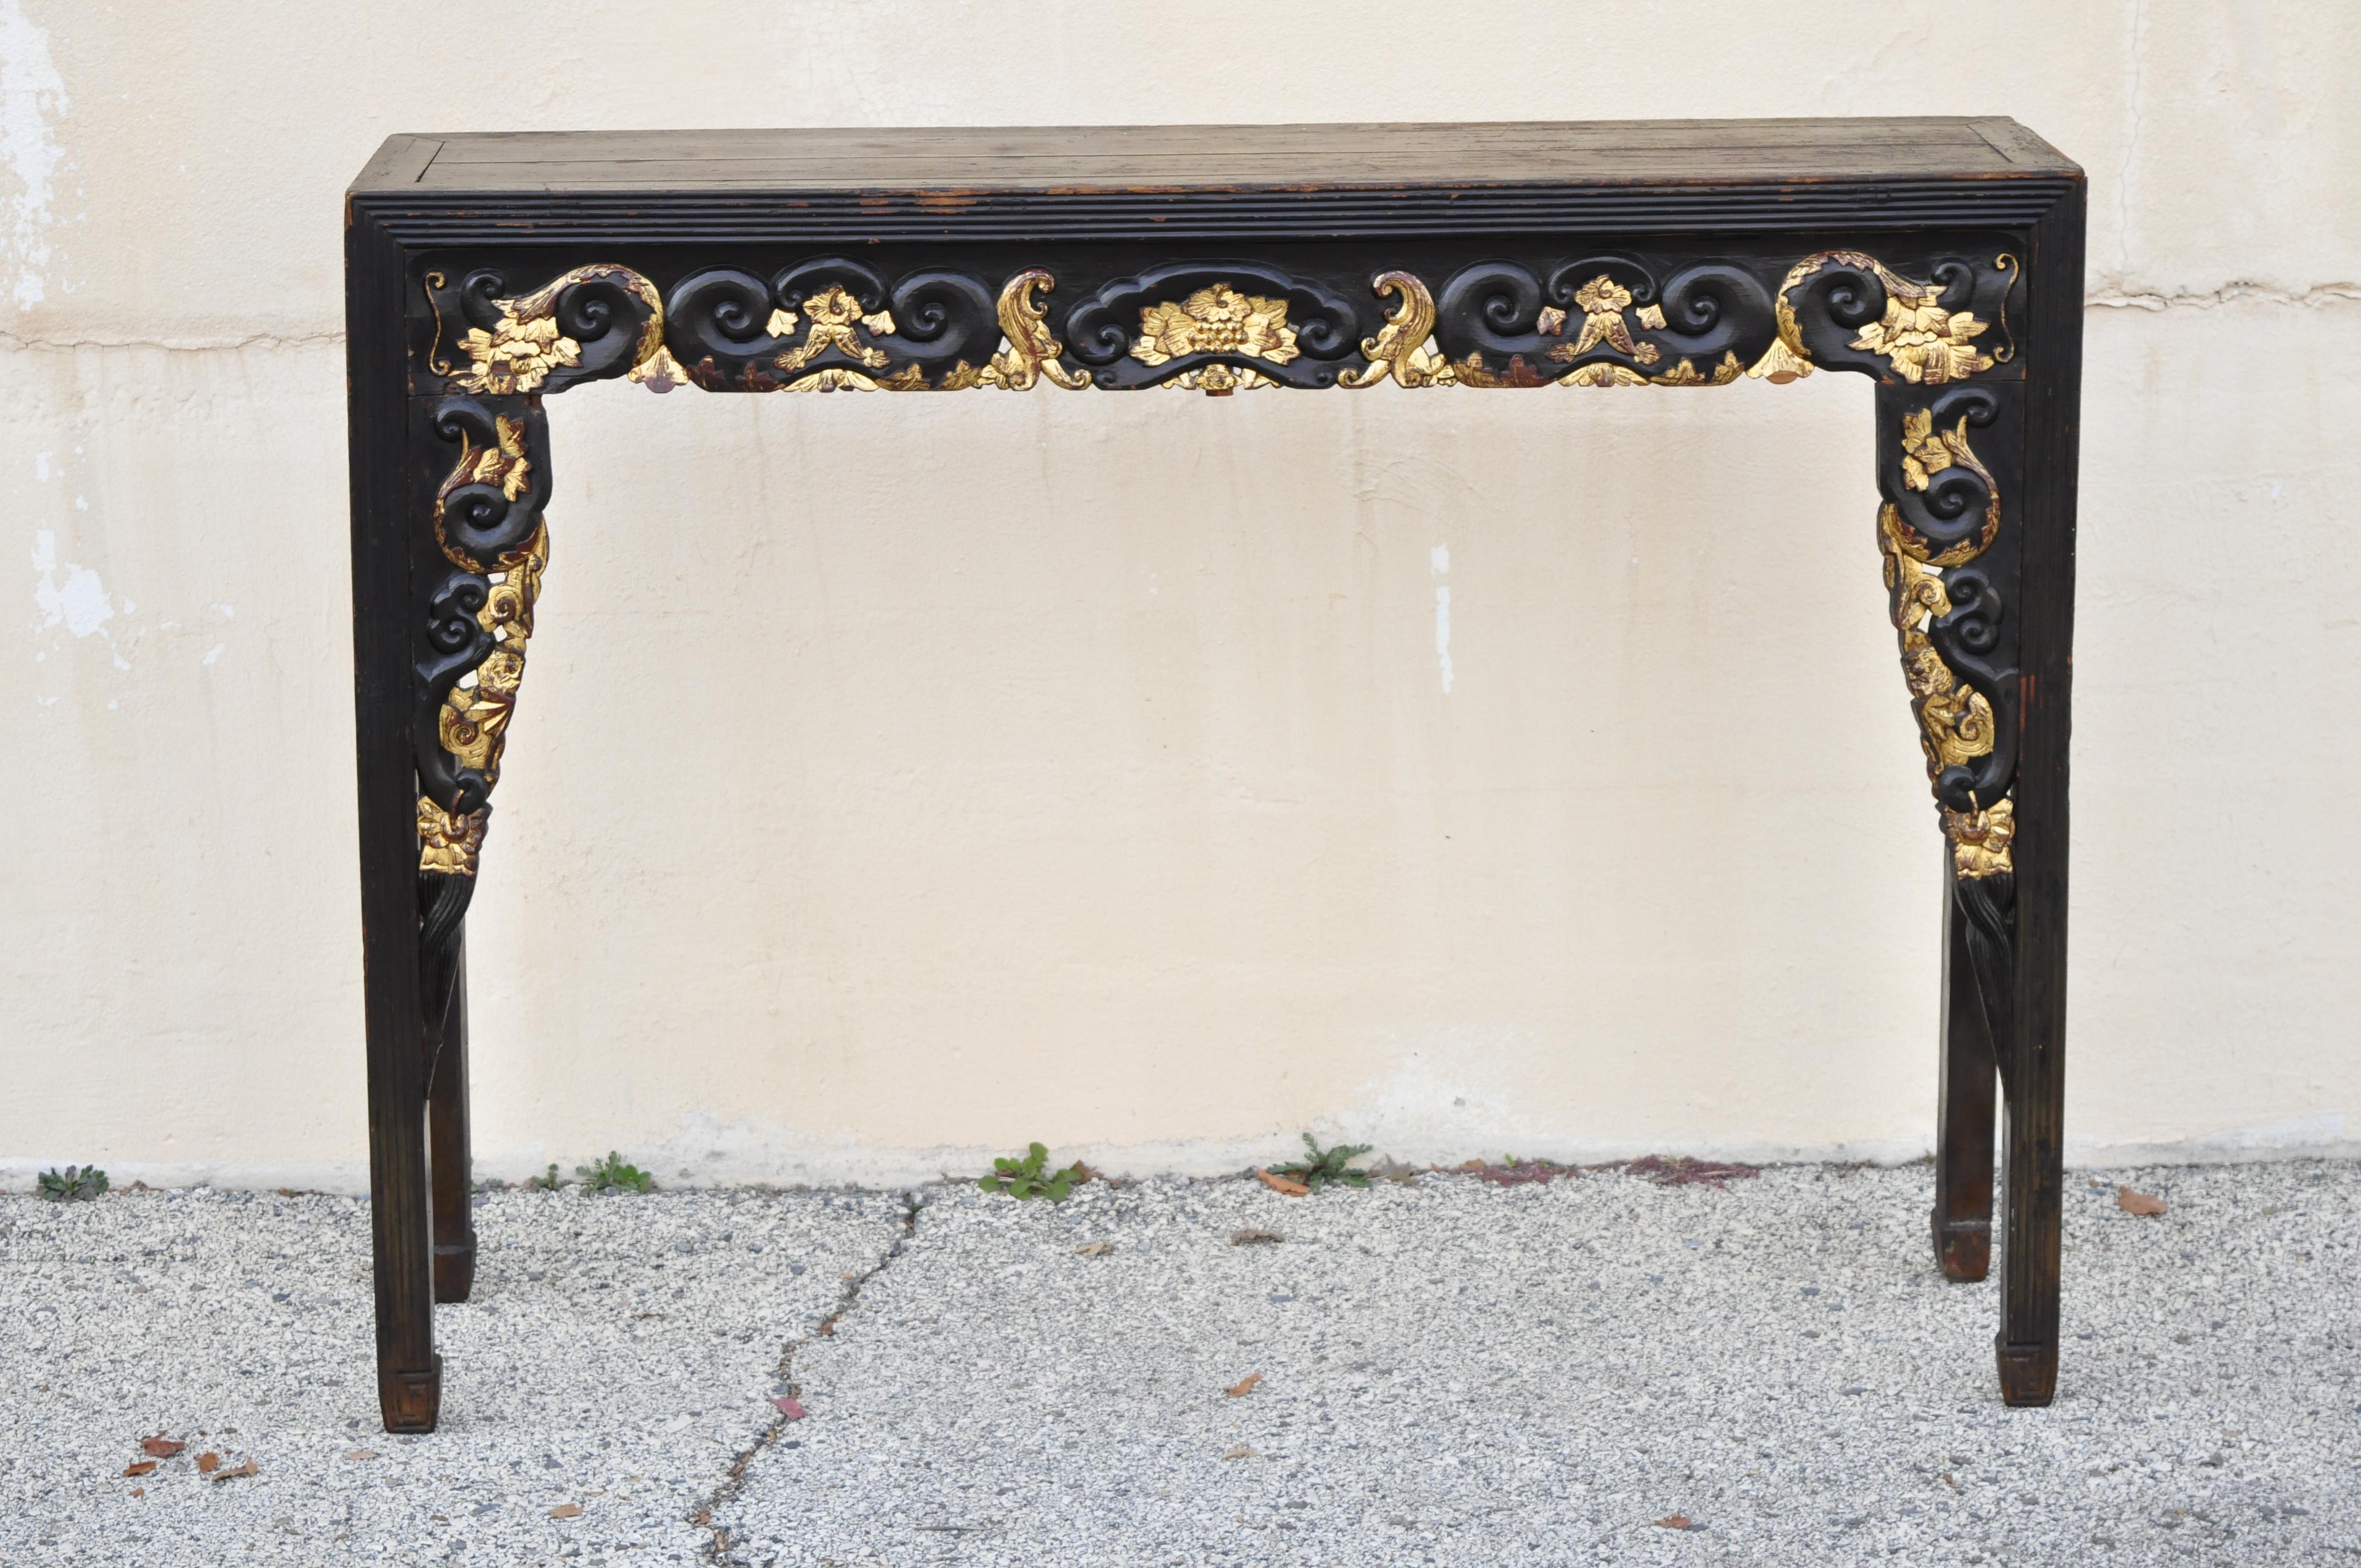 Antique Chinese hardwood tall altar table console table carved gold gilt detail. Item features gold gilt details, tall impressive size, solid wood construction, distressed finish, nicely carved details, very nice antique item, great style and form.